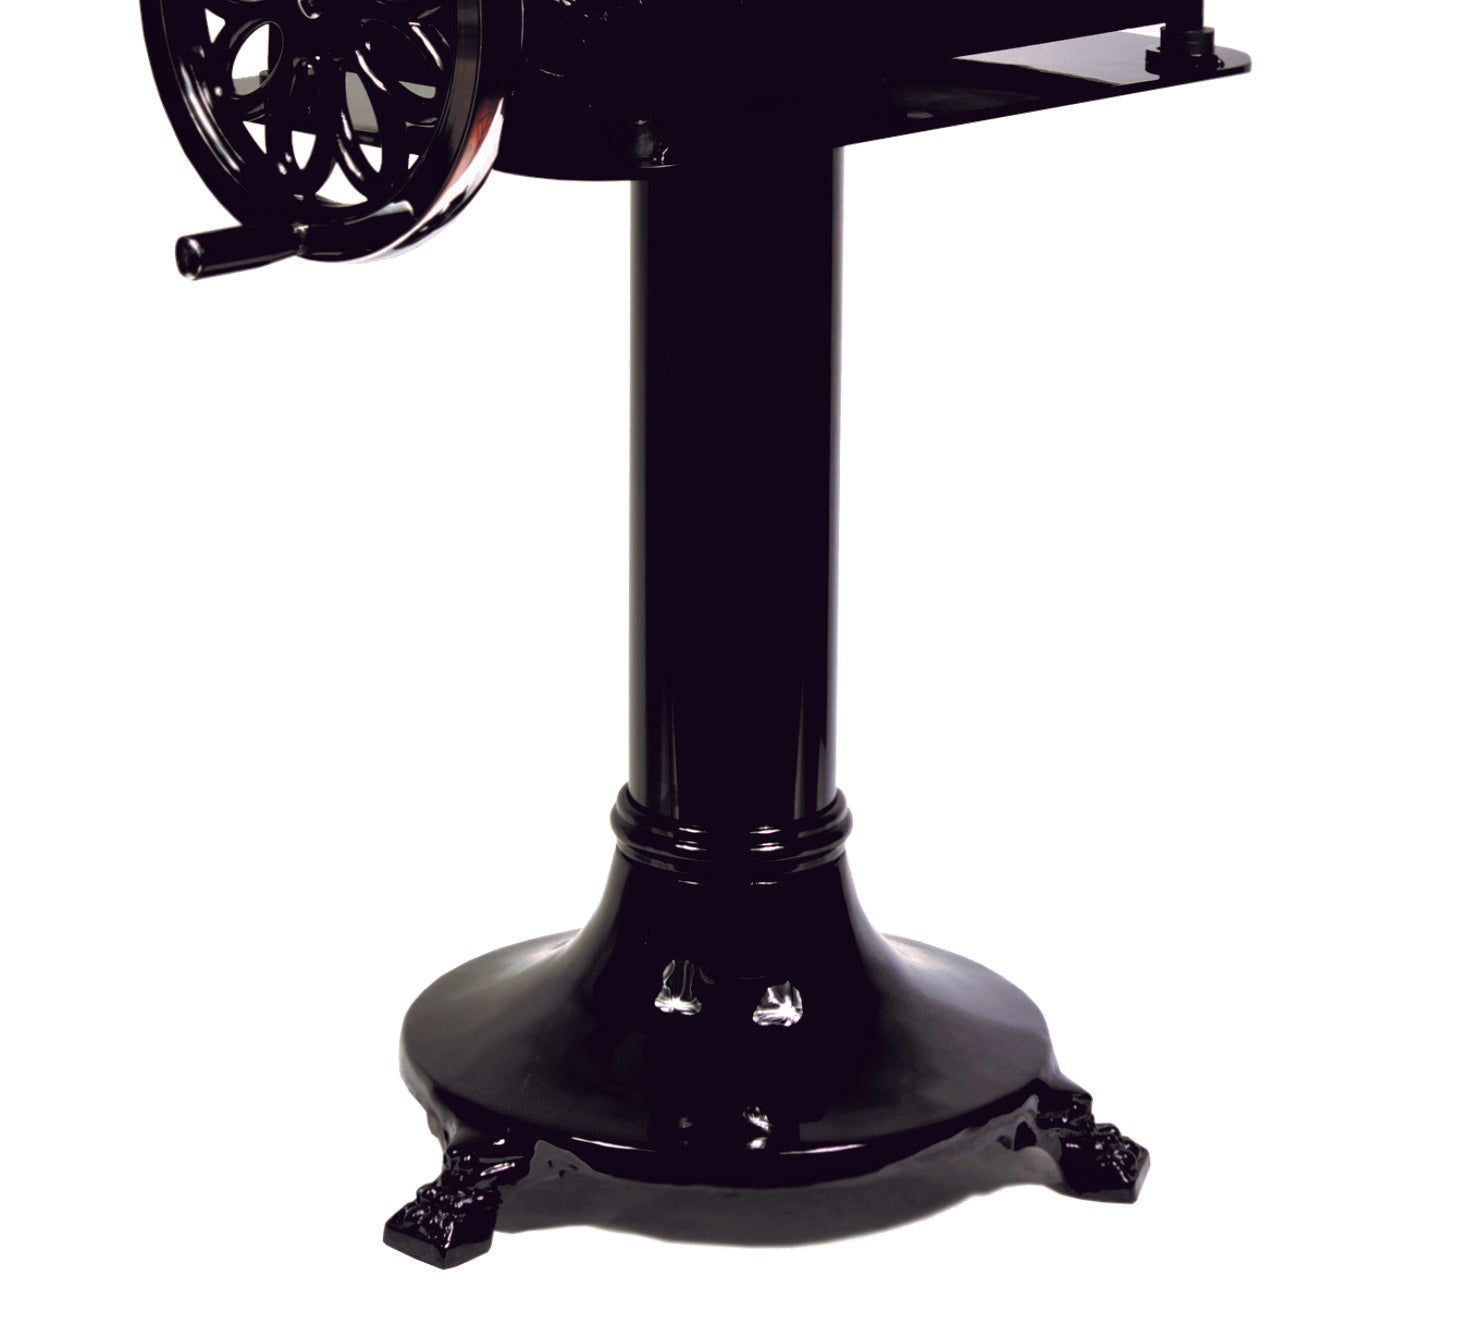 F350-Stand  - Flywheel Volano slicer stand Black color finish